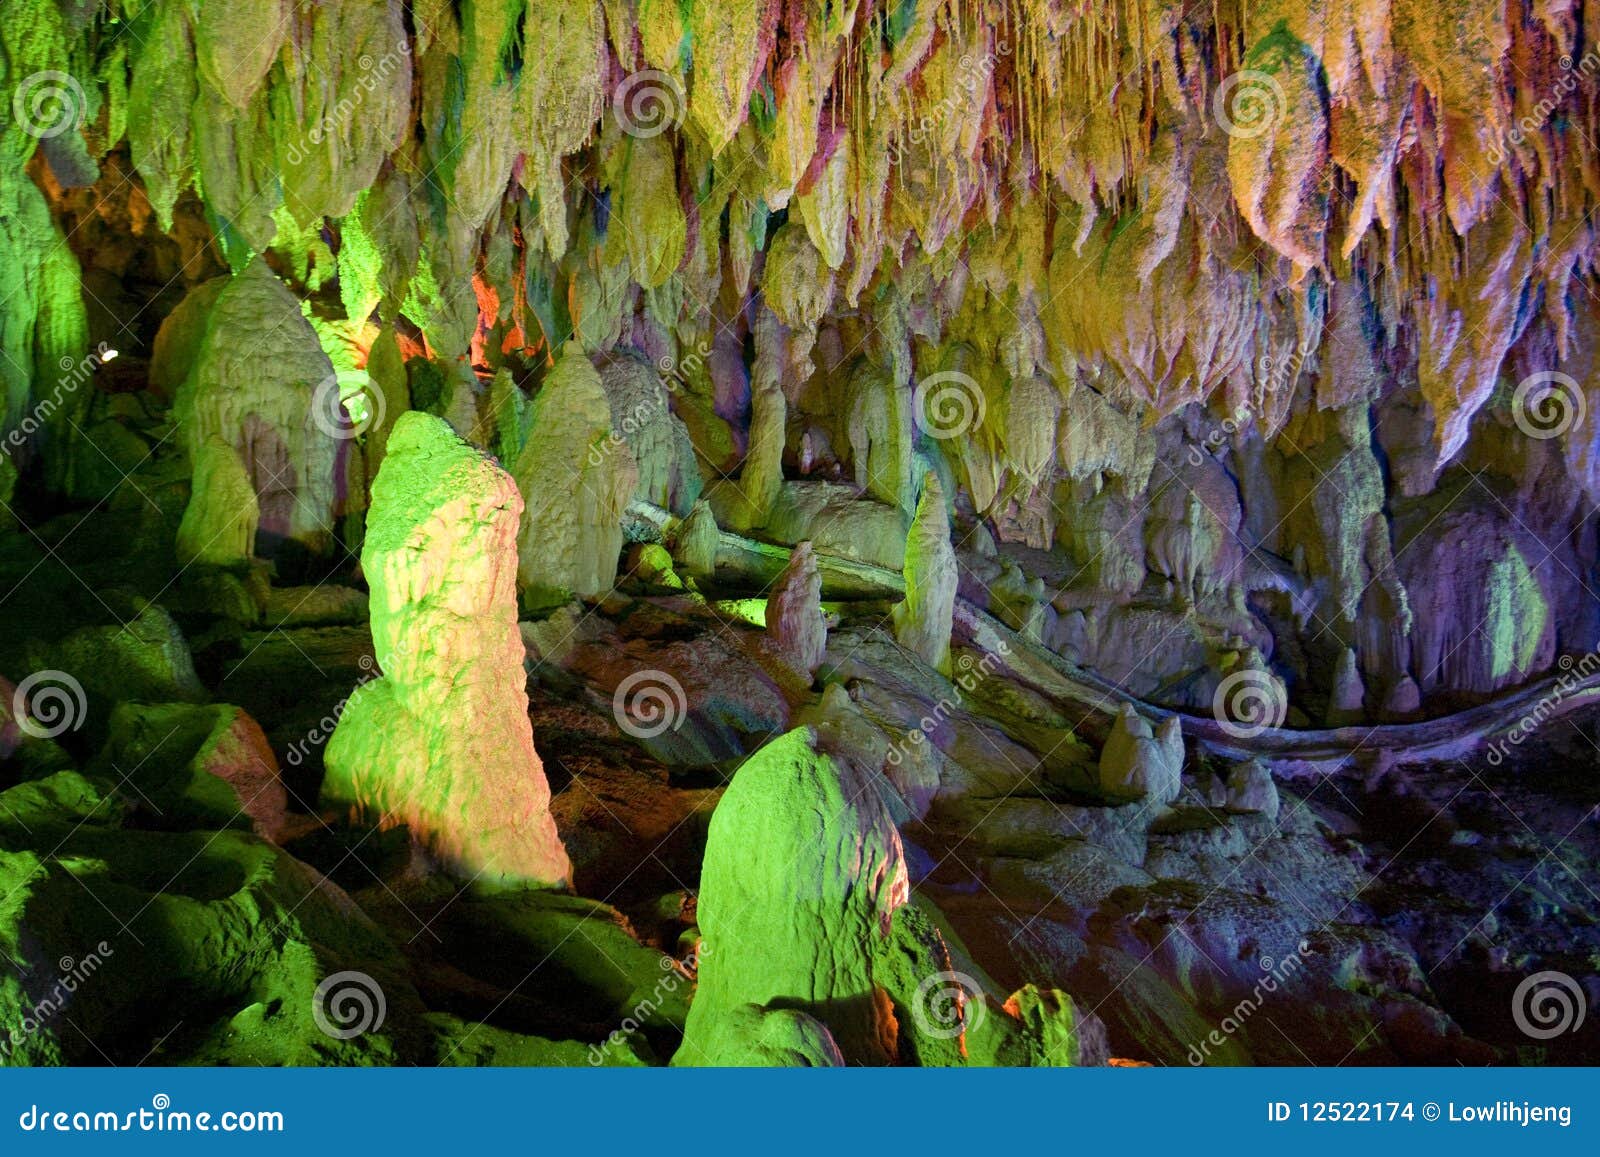 stalactites and stalagmites in cave